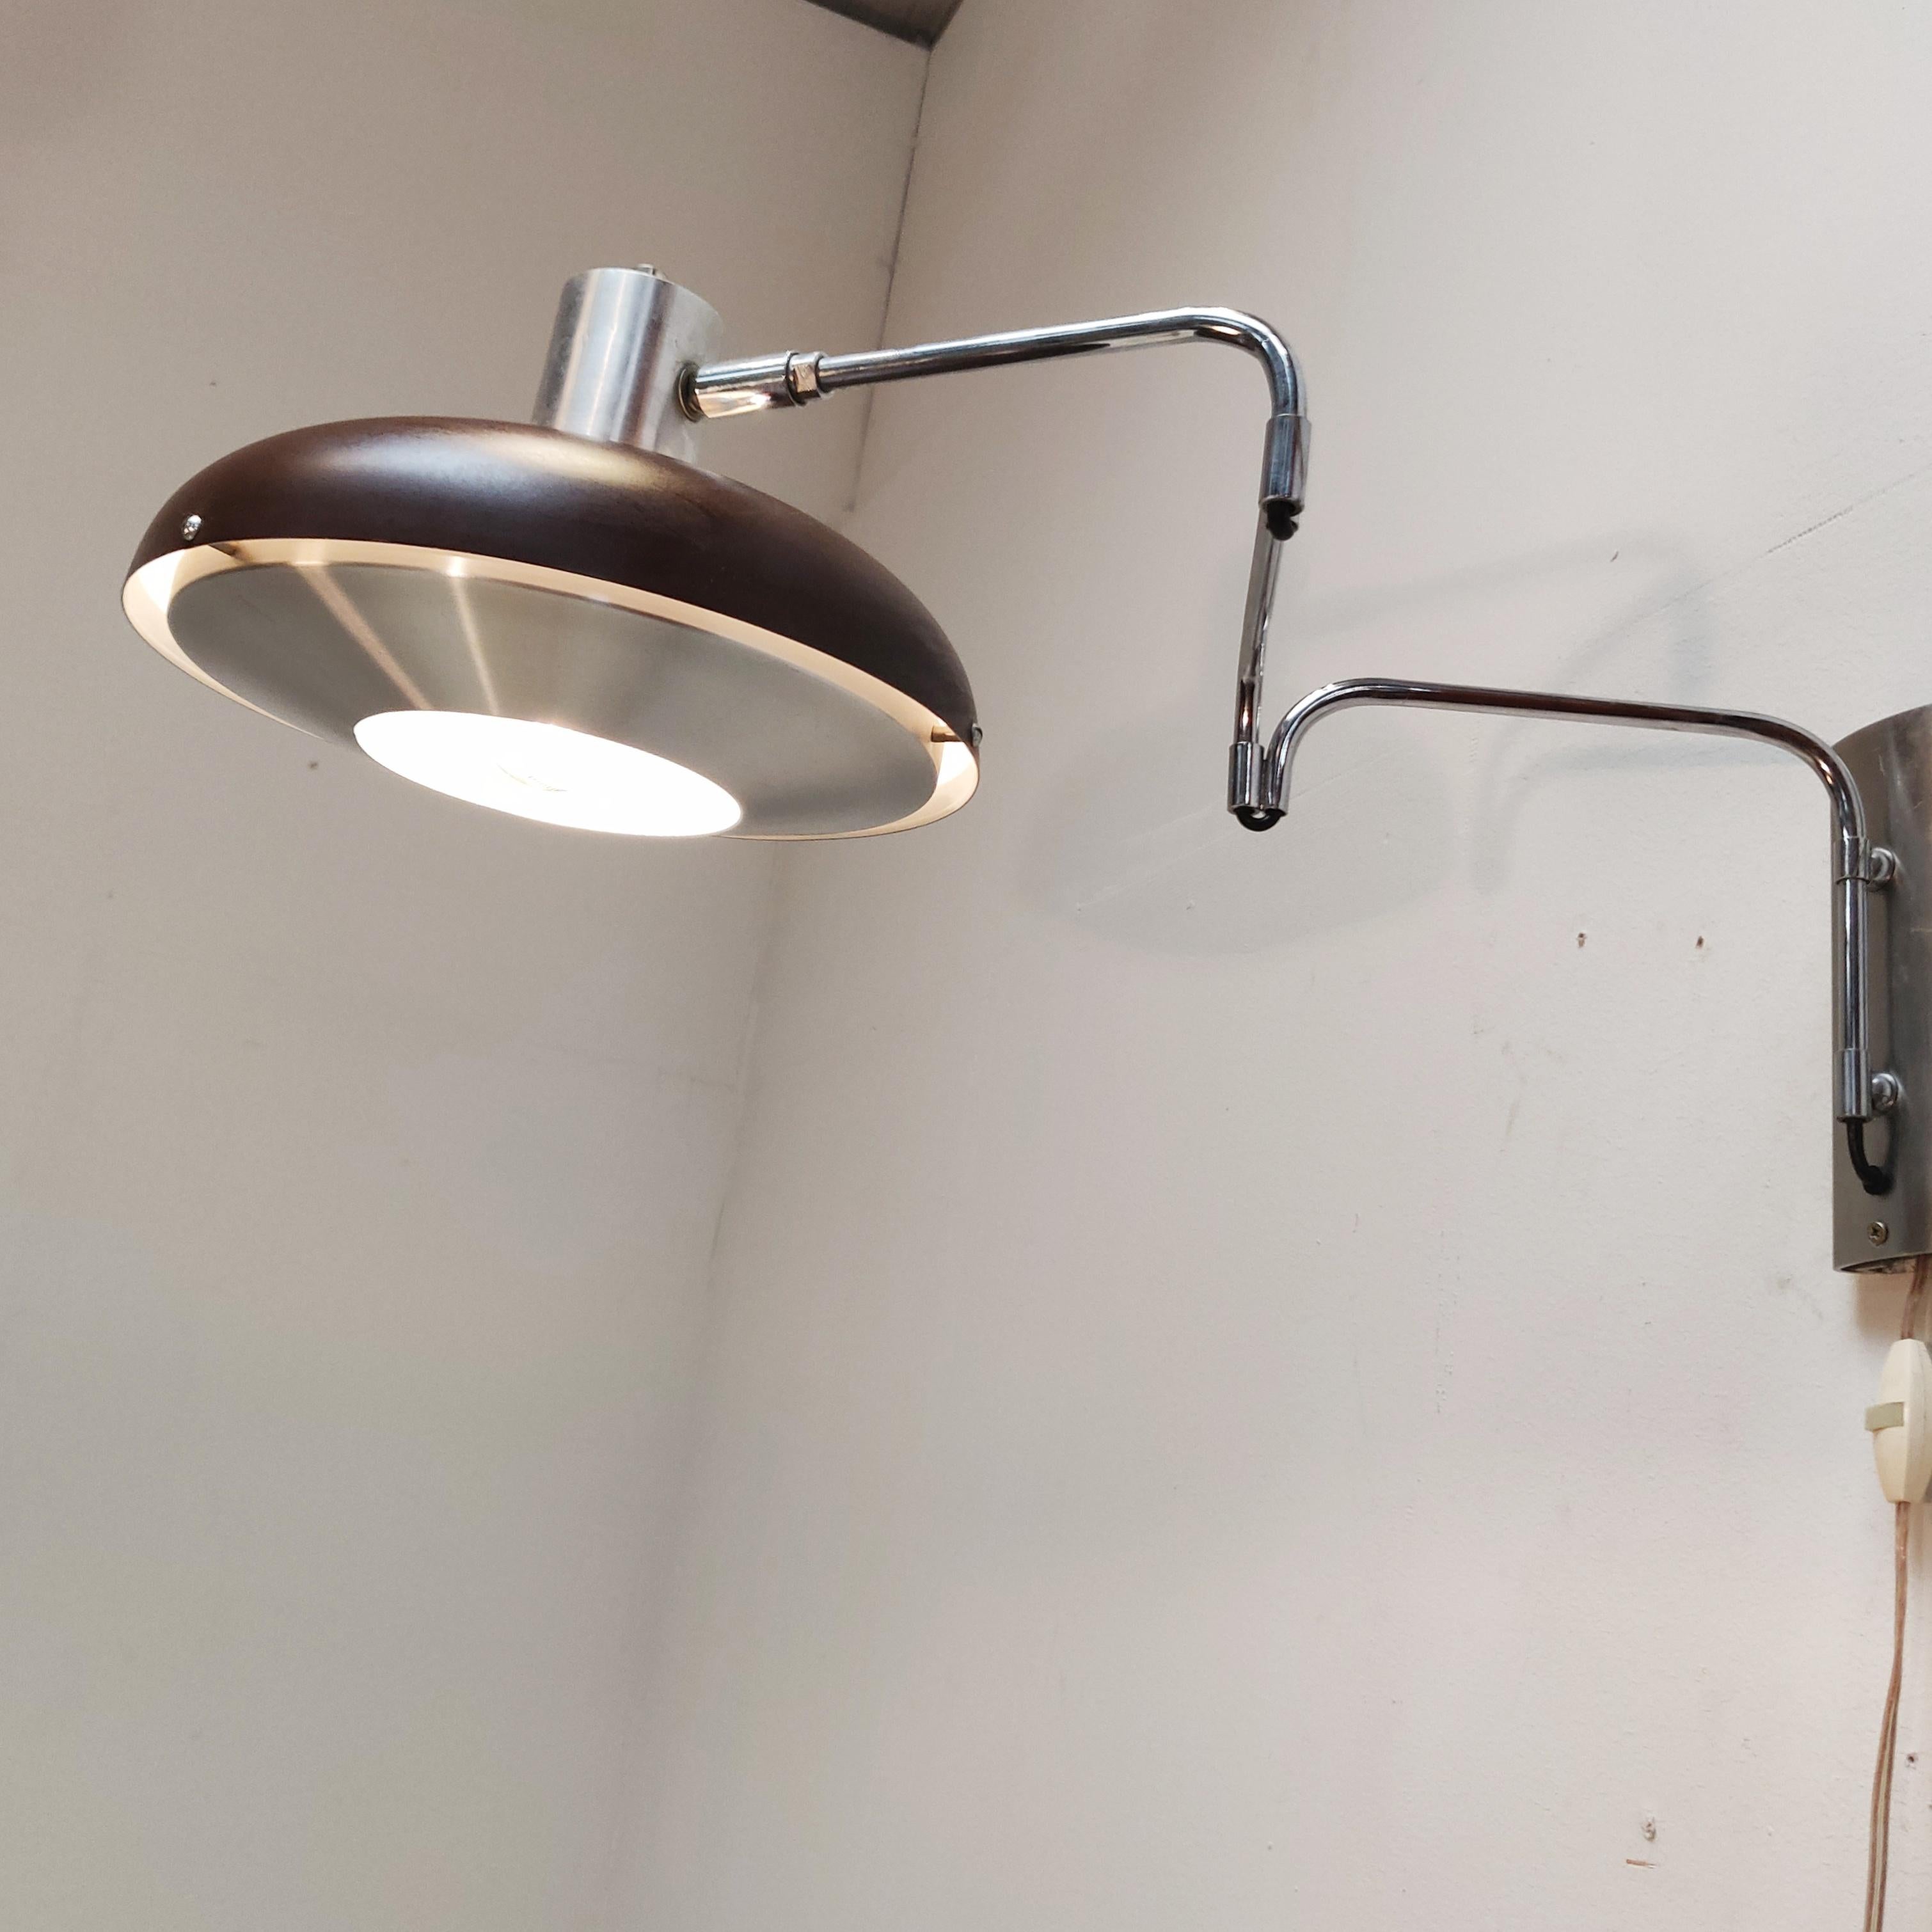 Dark brown and aluminum colored articulating wall lamp by Lakro Amstelveen with 3 chrome arms and a mounting plate. The shade has an aluminum diffuser.

